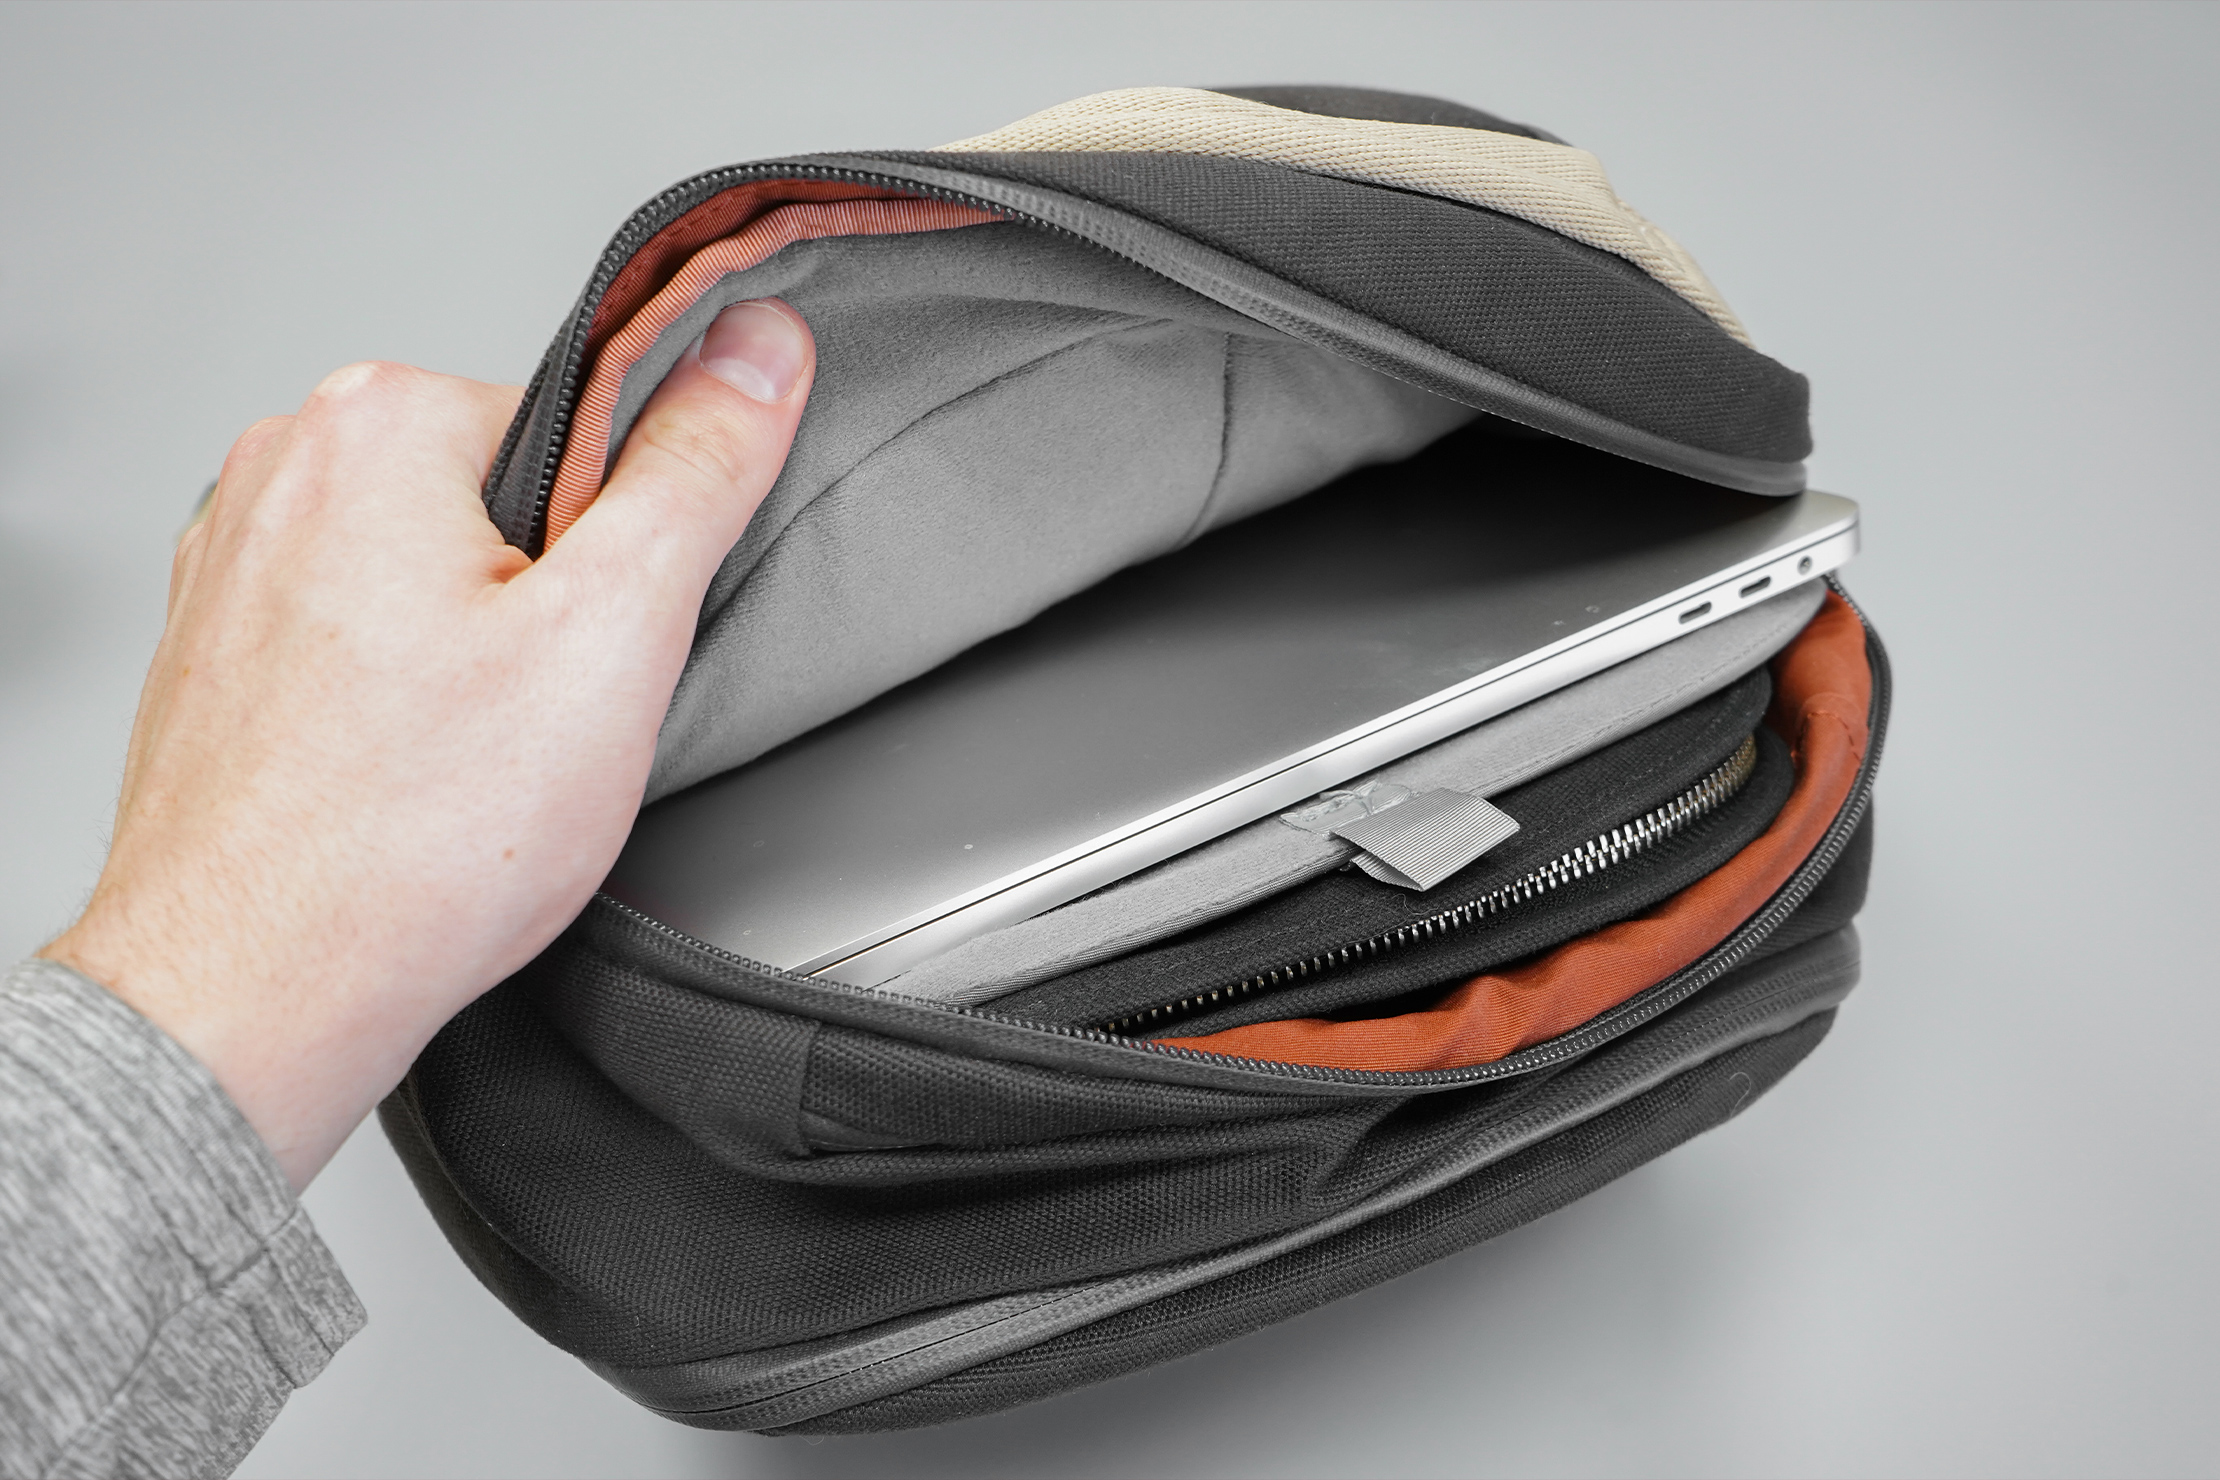 Bellroy Transit Workpack | The laptop compartment can hold your tech pouch too